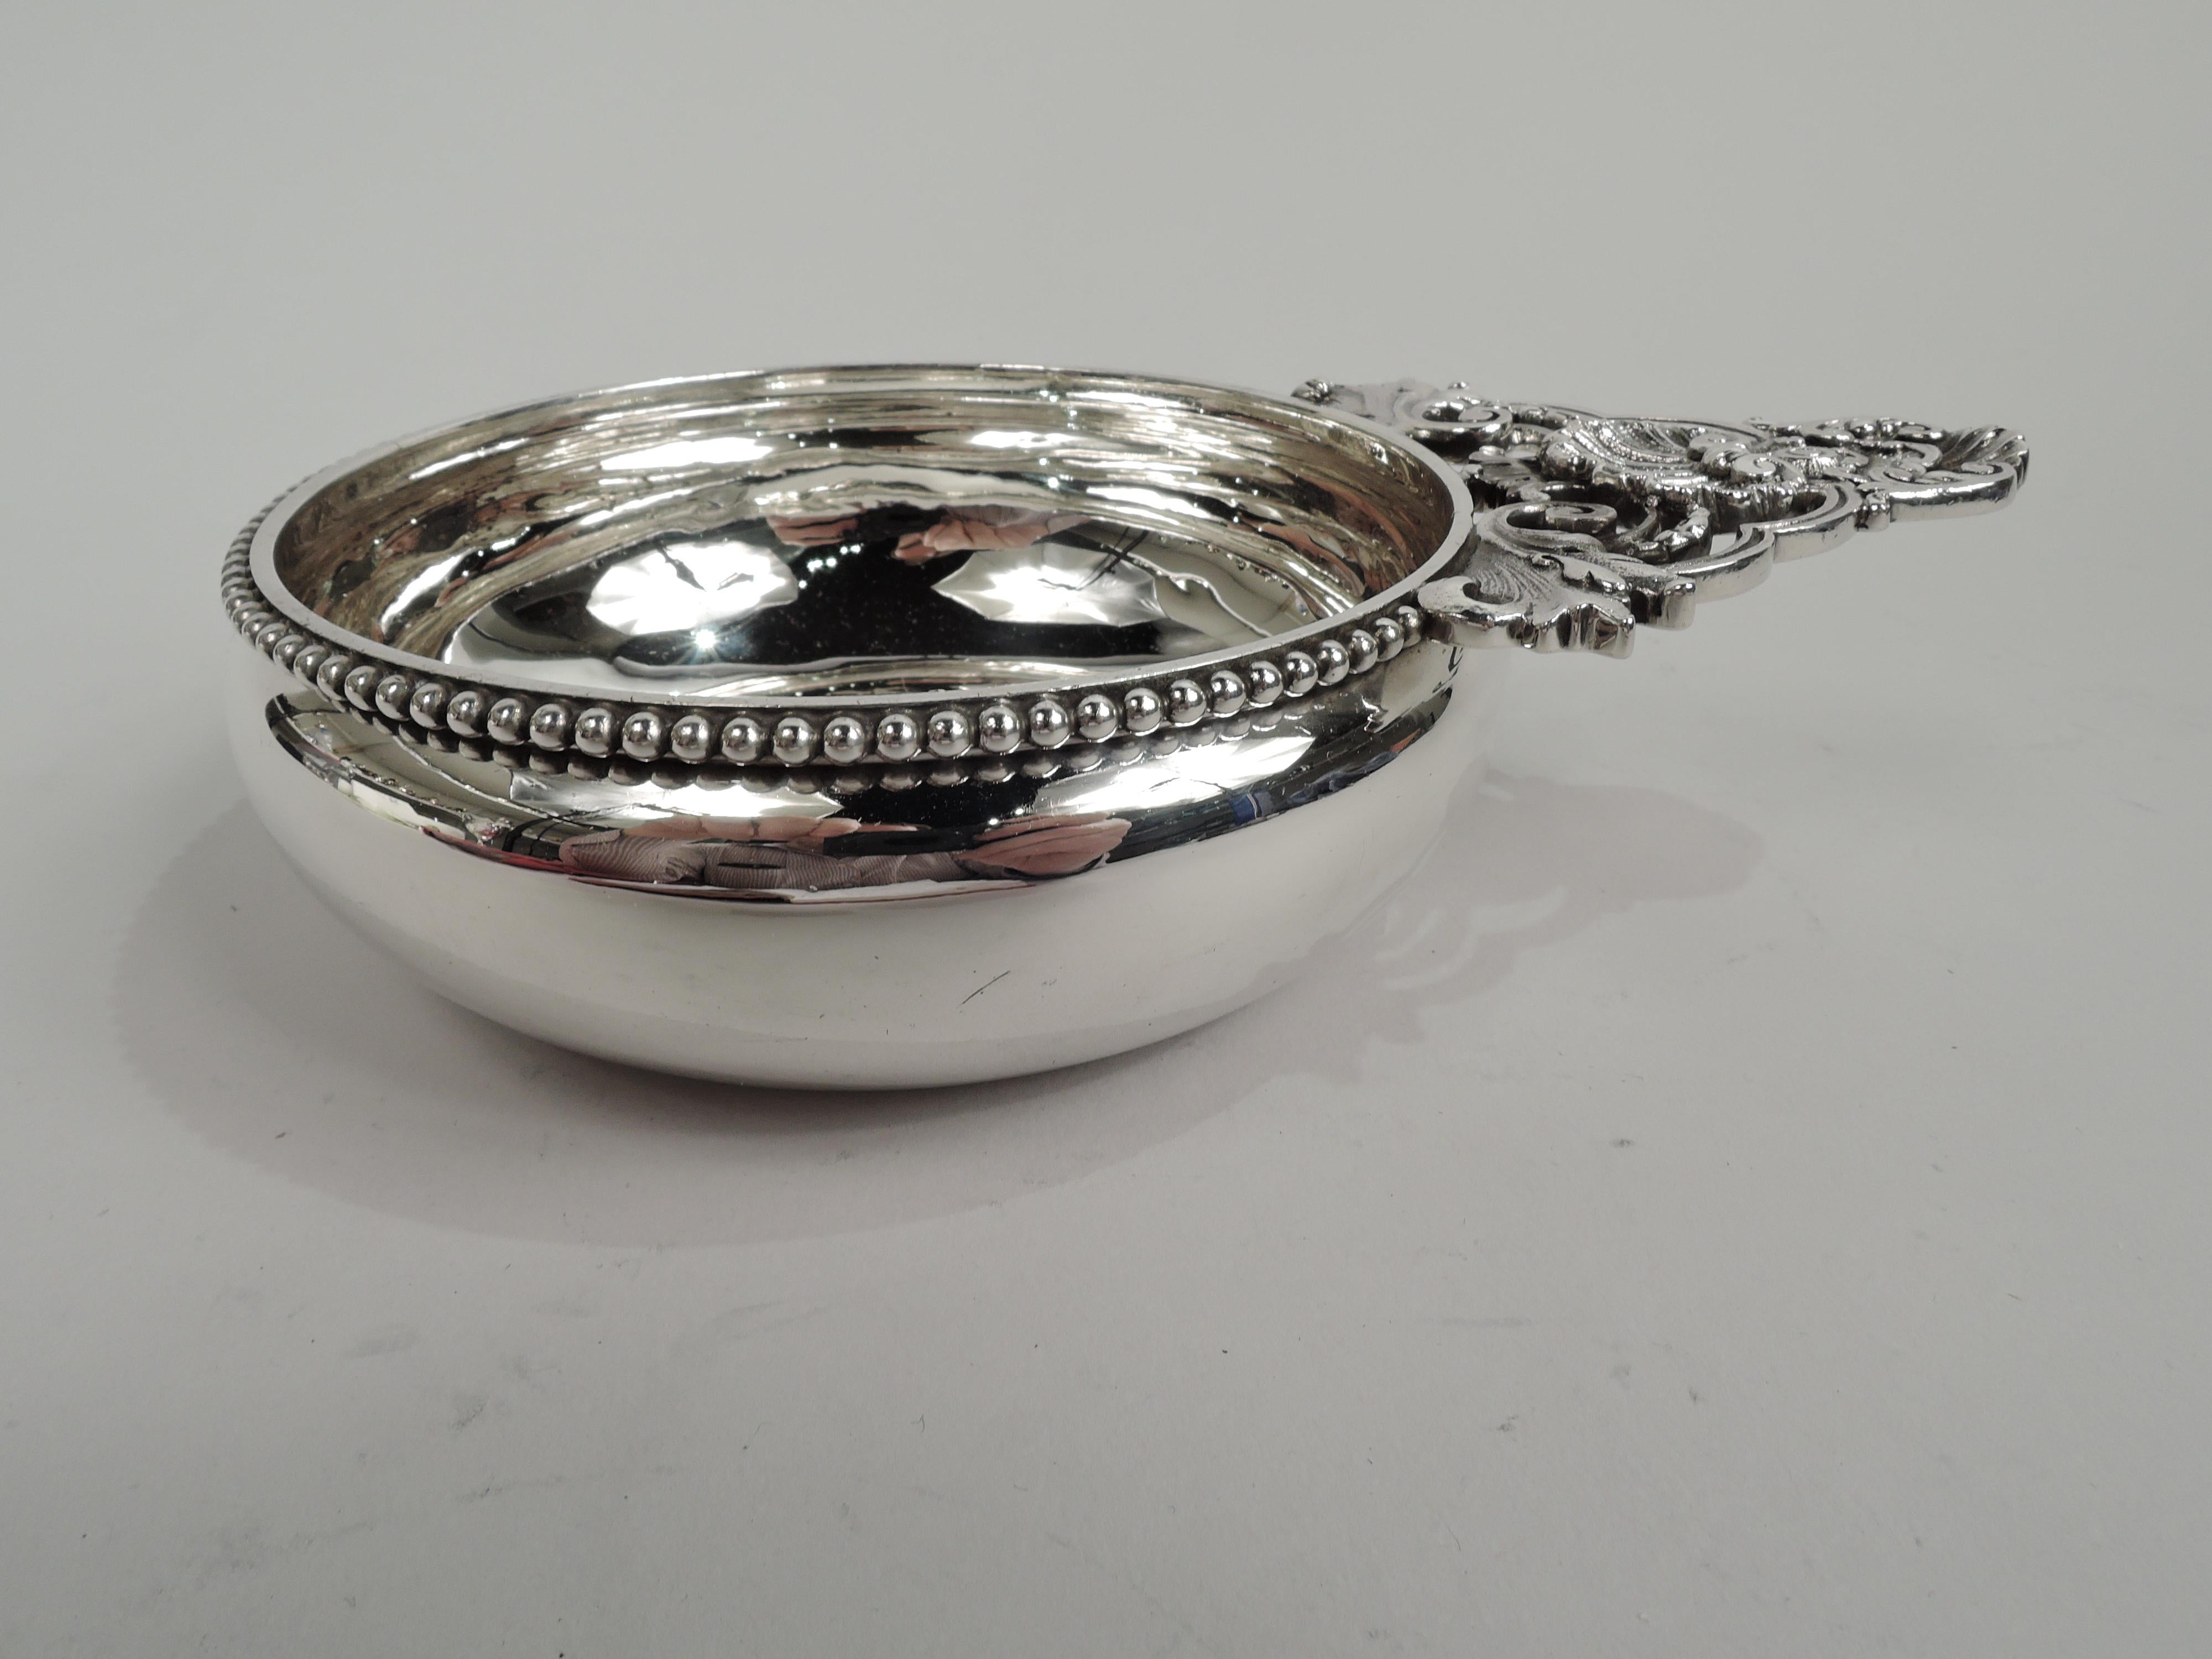 Victorian classical sterling silver porringer. Made by Tiffany & Co. in New York. Bowl has curved sides and rim applied with bold beading. Leaf-mounted open scroll handle with scallop shells. Fully marked including maker’s stamp, pattern no. 12755,